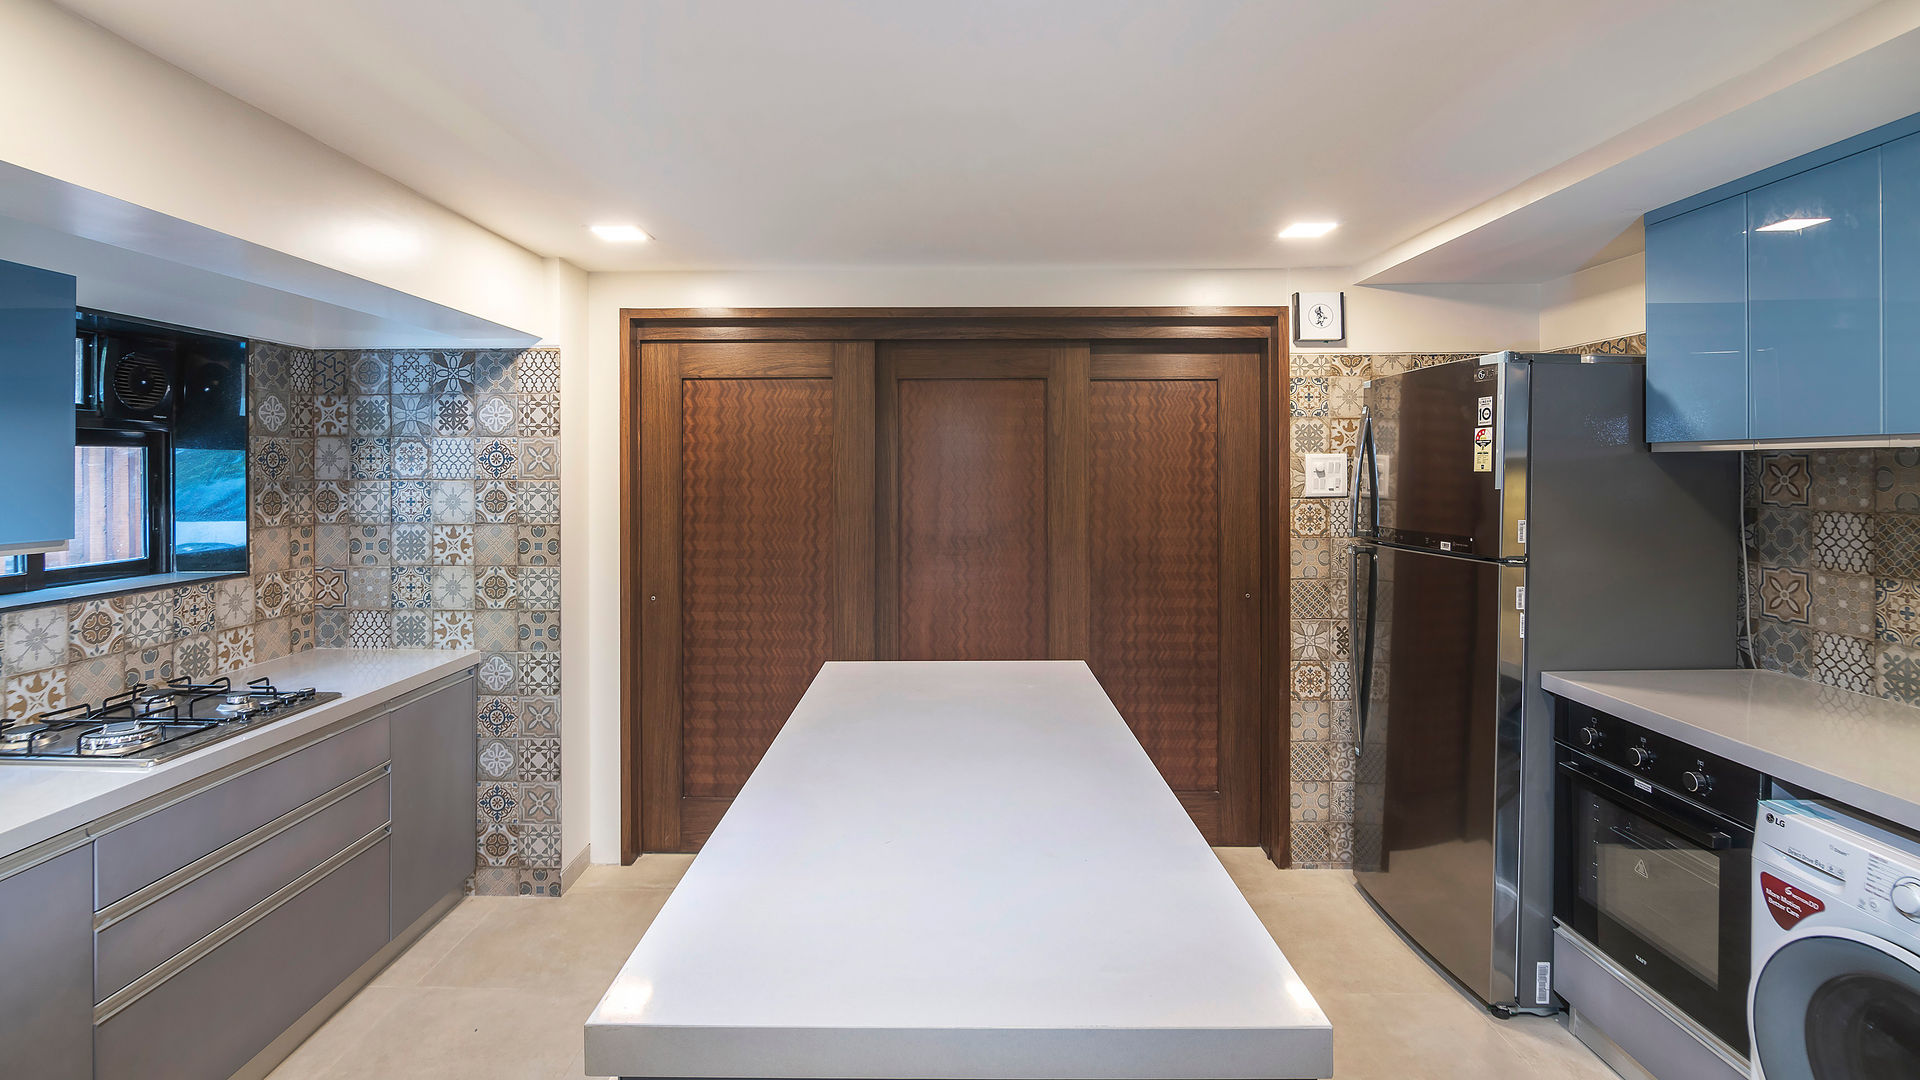 Small Kitchen with Island - Mumbai Project by Kuche7 Küche7 Kitchen آئرن / اسٹیل Bench tops